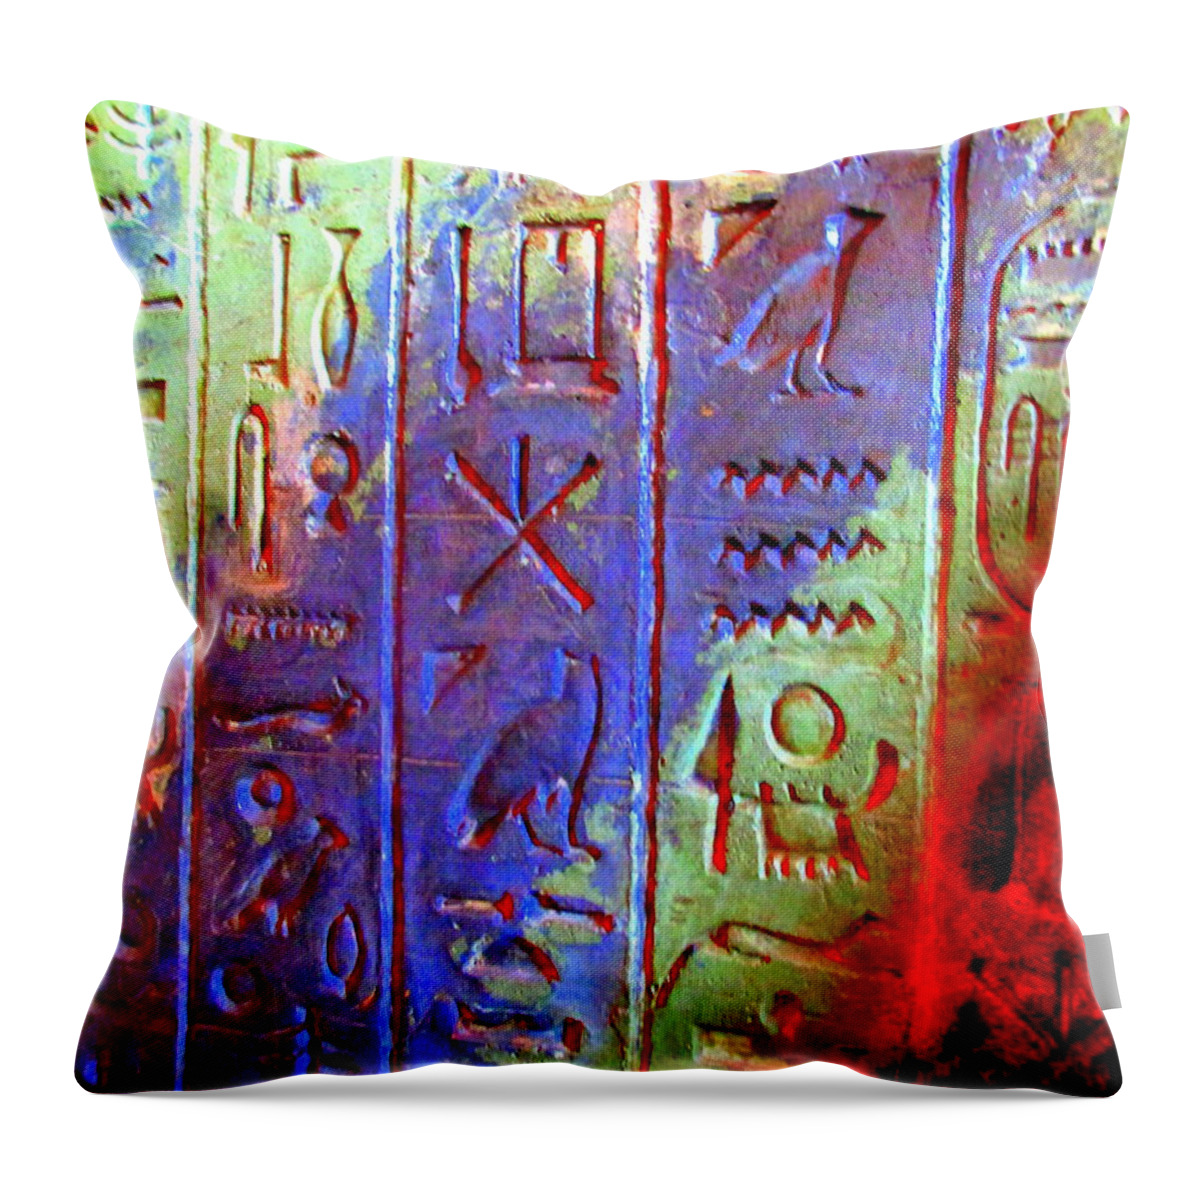 Egypt Throw Pillow featuring the photograph Egyptian Symbols by Randall Weidner